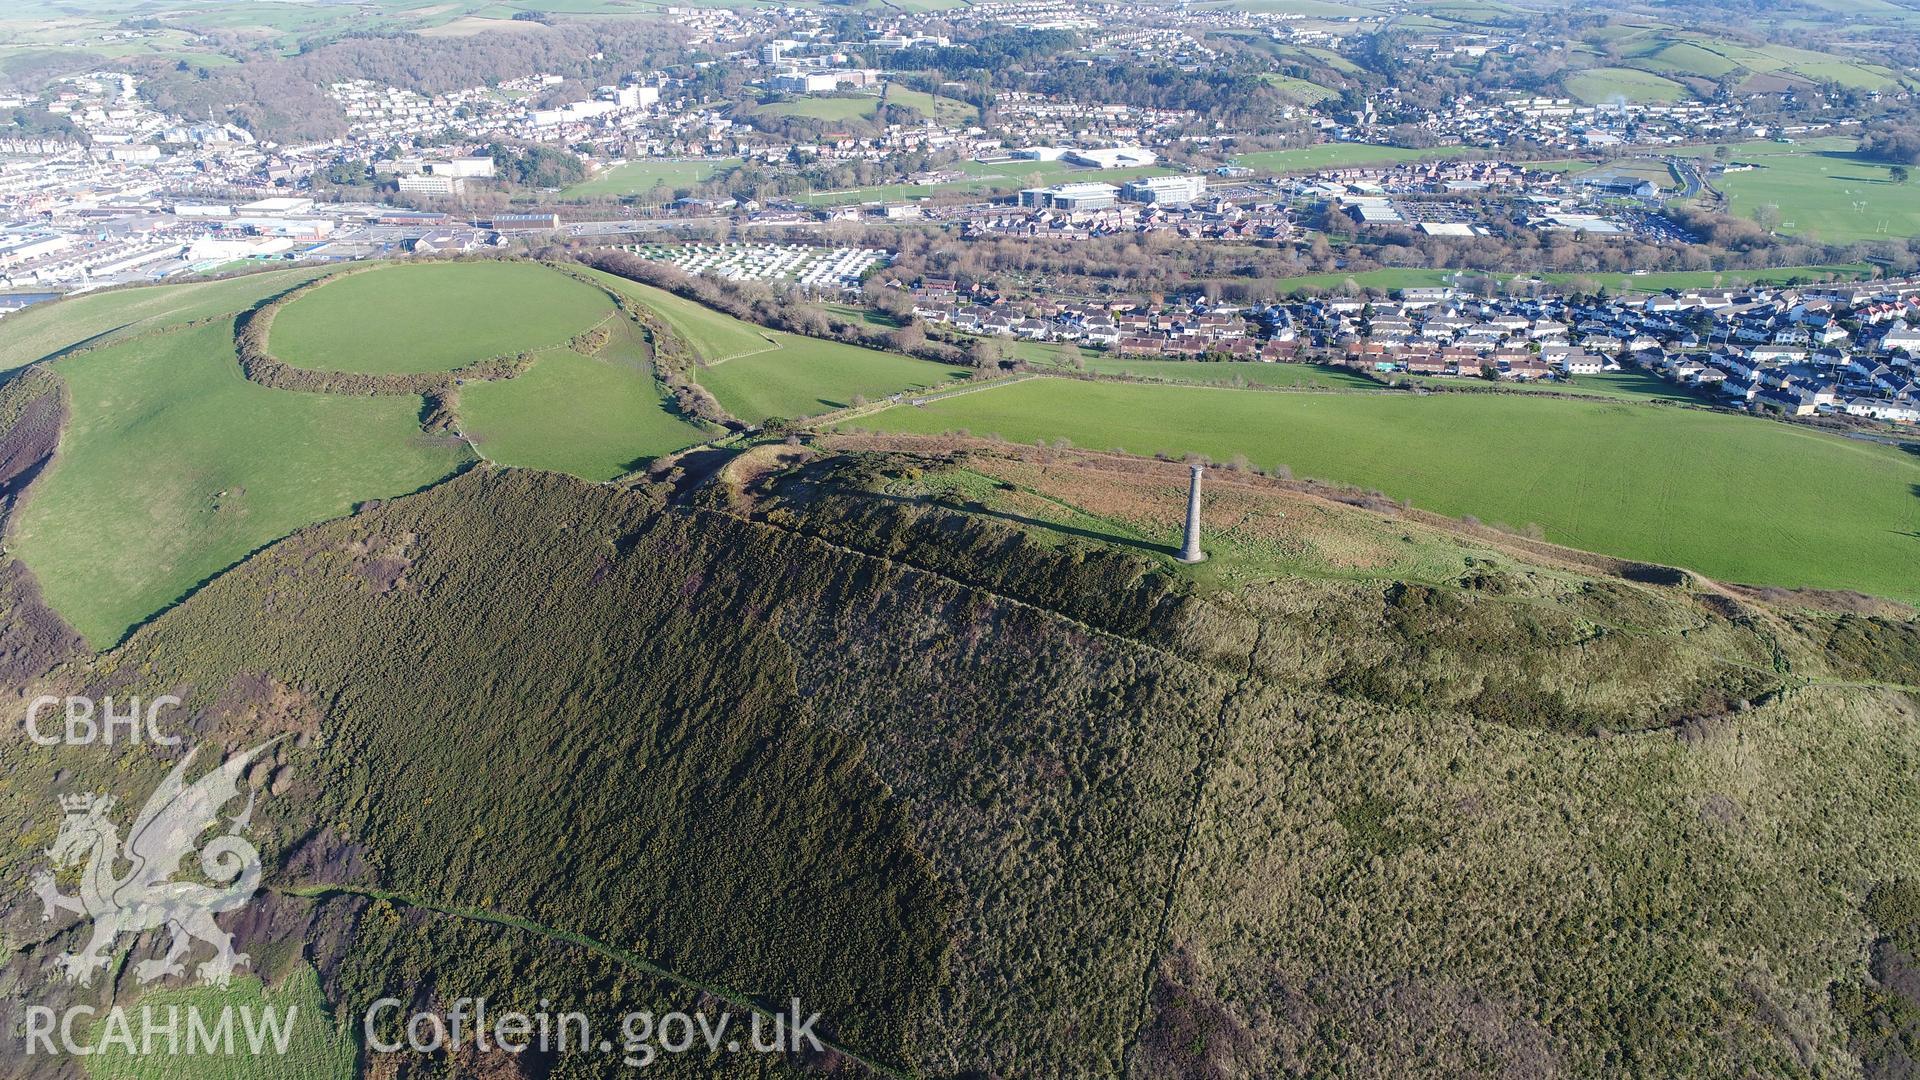 View of Pen Dinas hillfort from the west. CHERISH Project DJI drone photo survey of Pen Dinas Hillfort and the Wellington Monument. ? Crown: CHERISH PROJECT 2017. Produced with EU funds through the Ireland Wales Co-operation Programme 2014-2020. All material made freely available through the Open Government Licence.